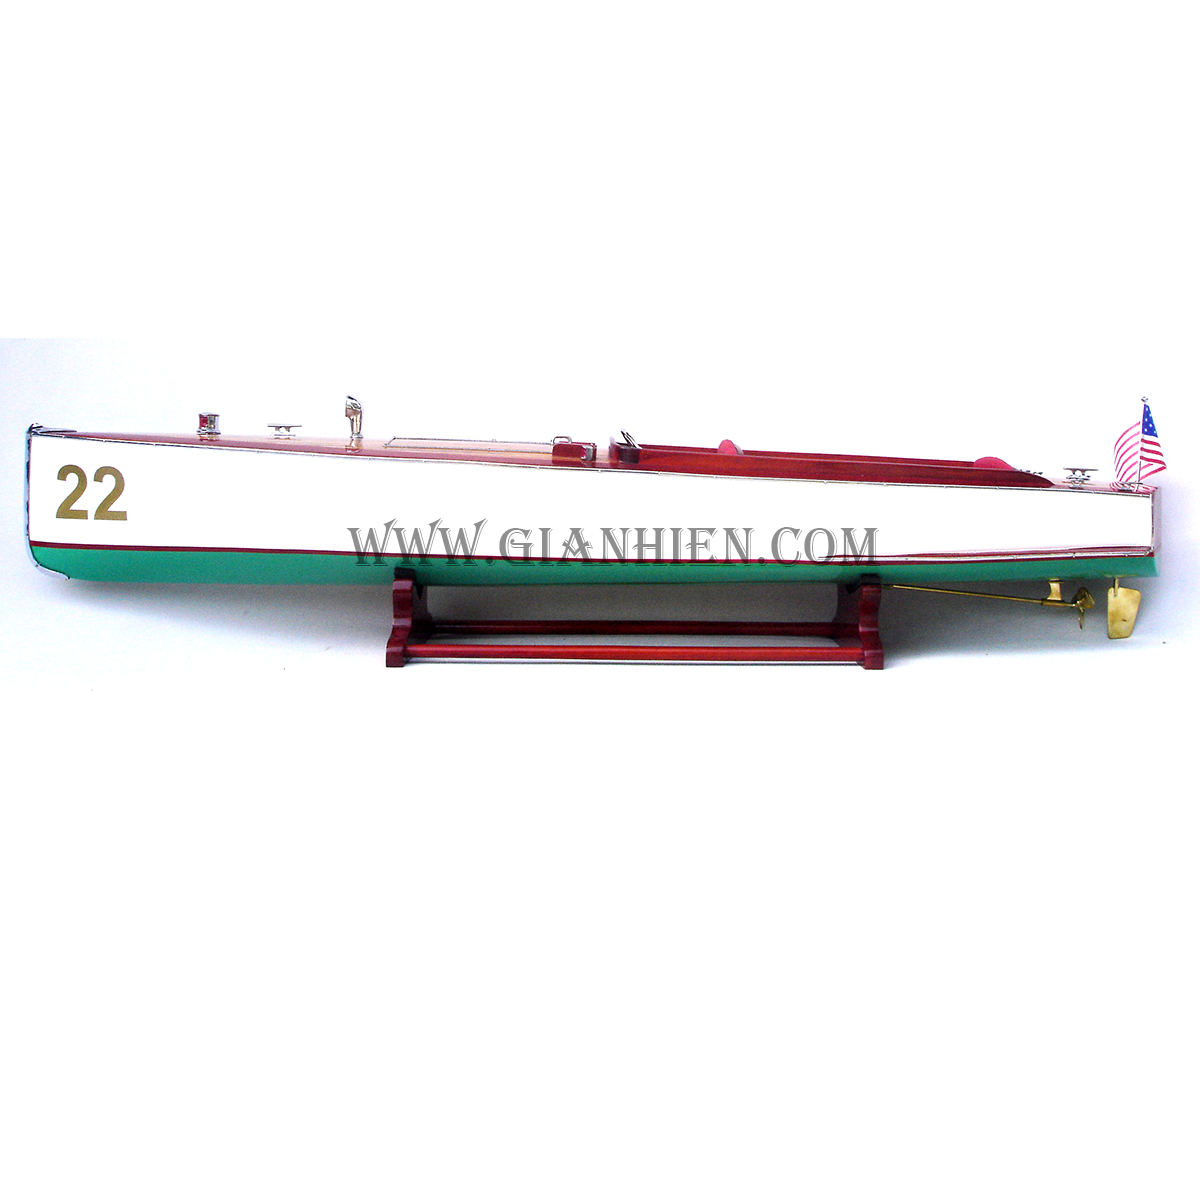 CHARLES D. MOWER NUMBER BOAT 22